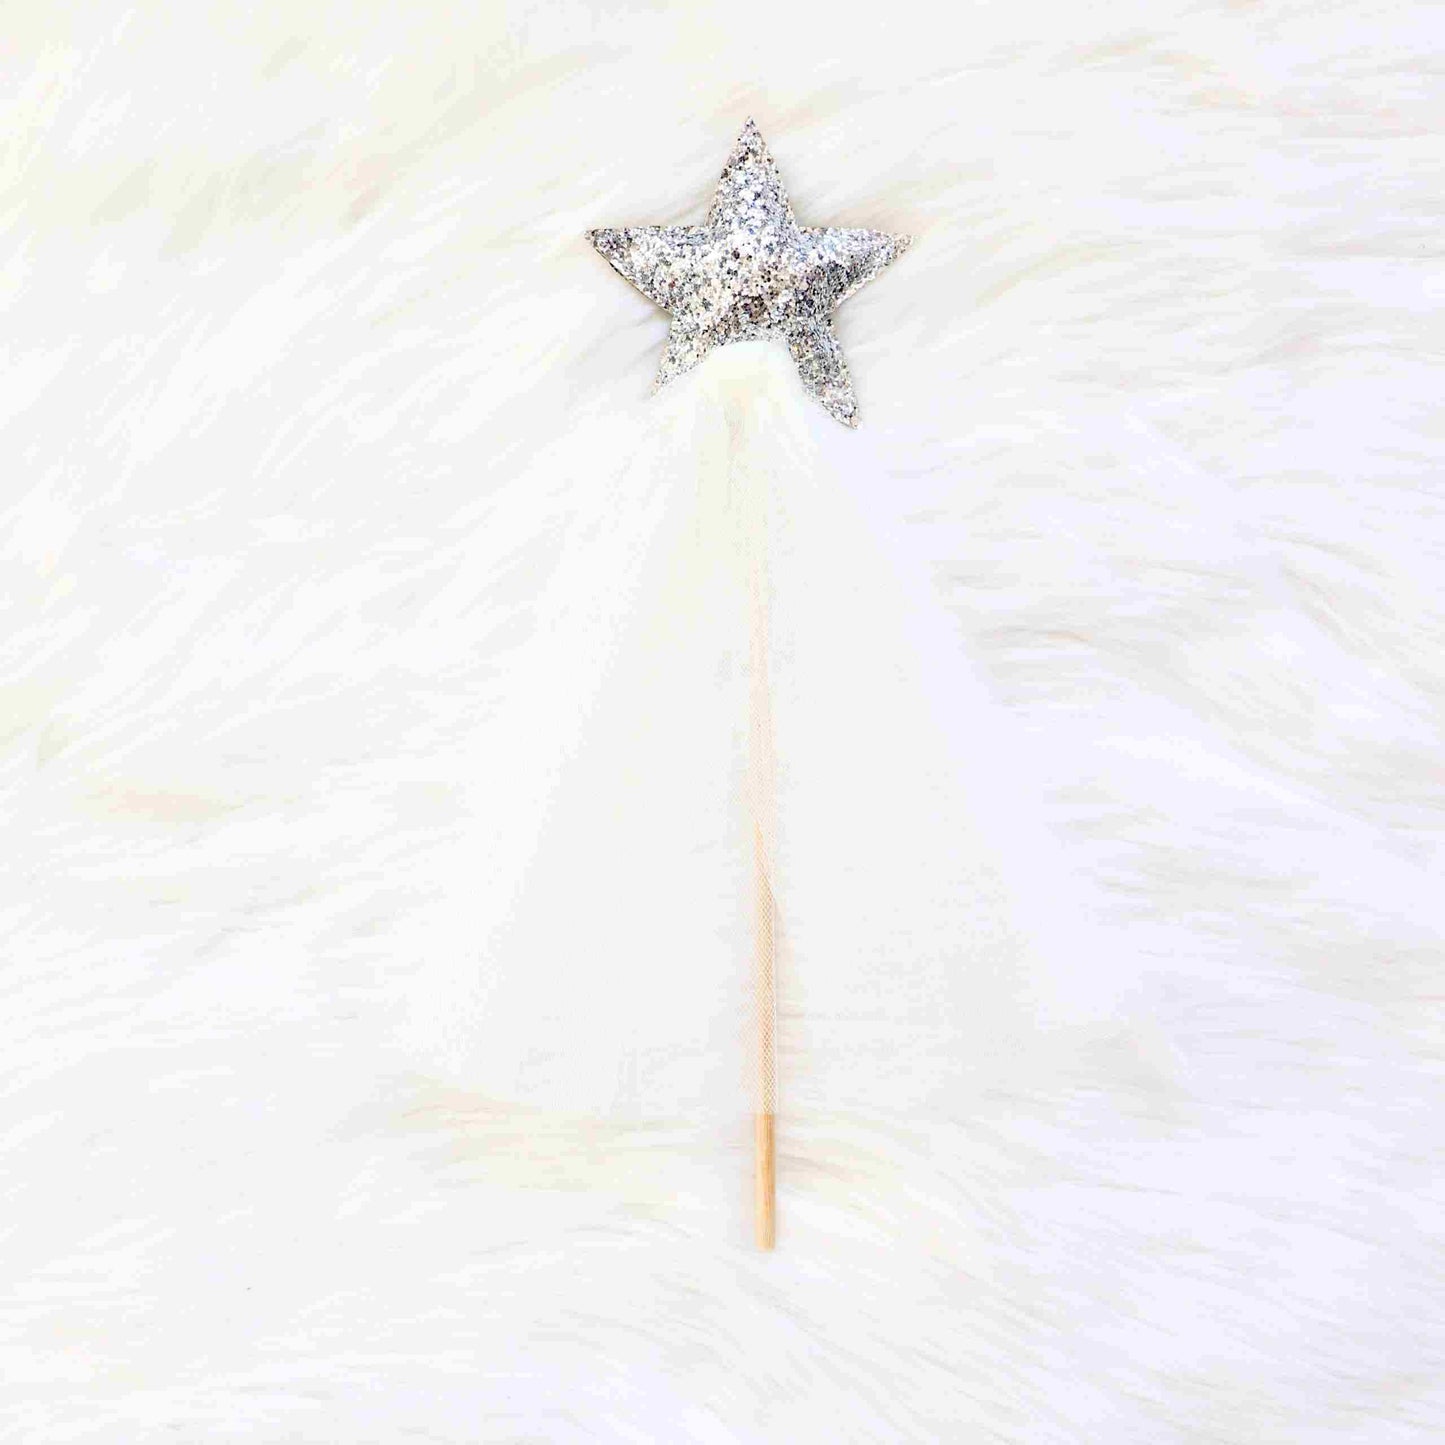 a star shaped object on a white fur surface